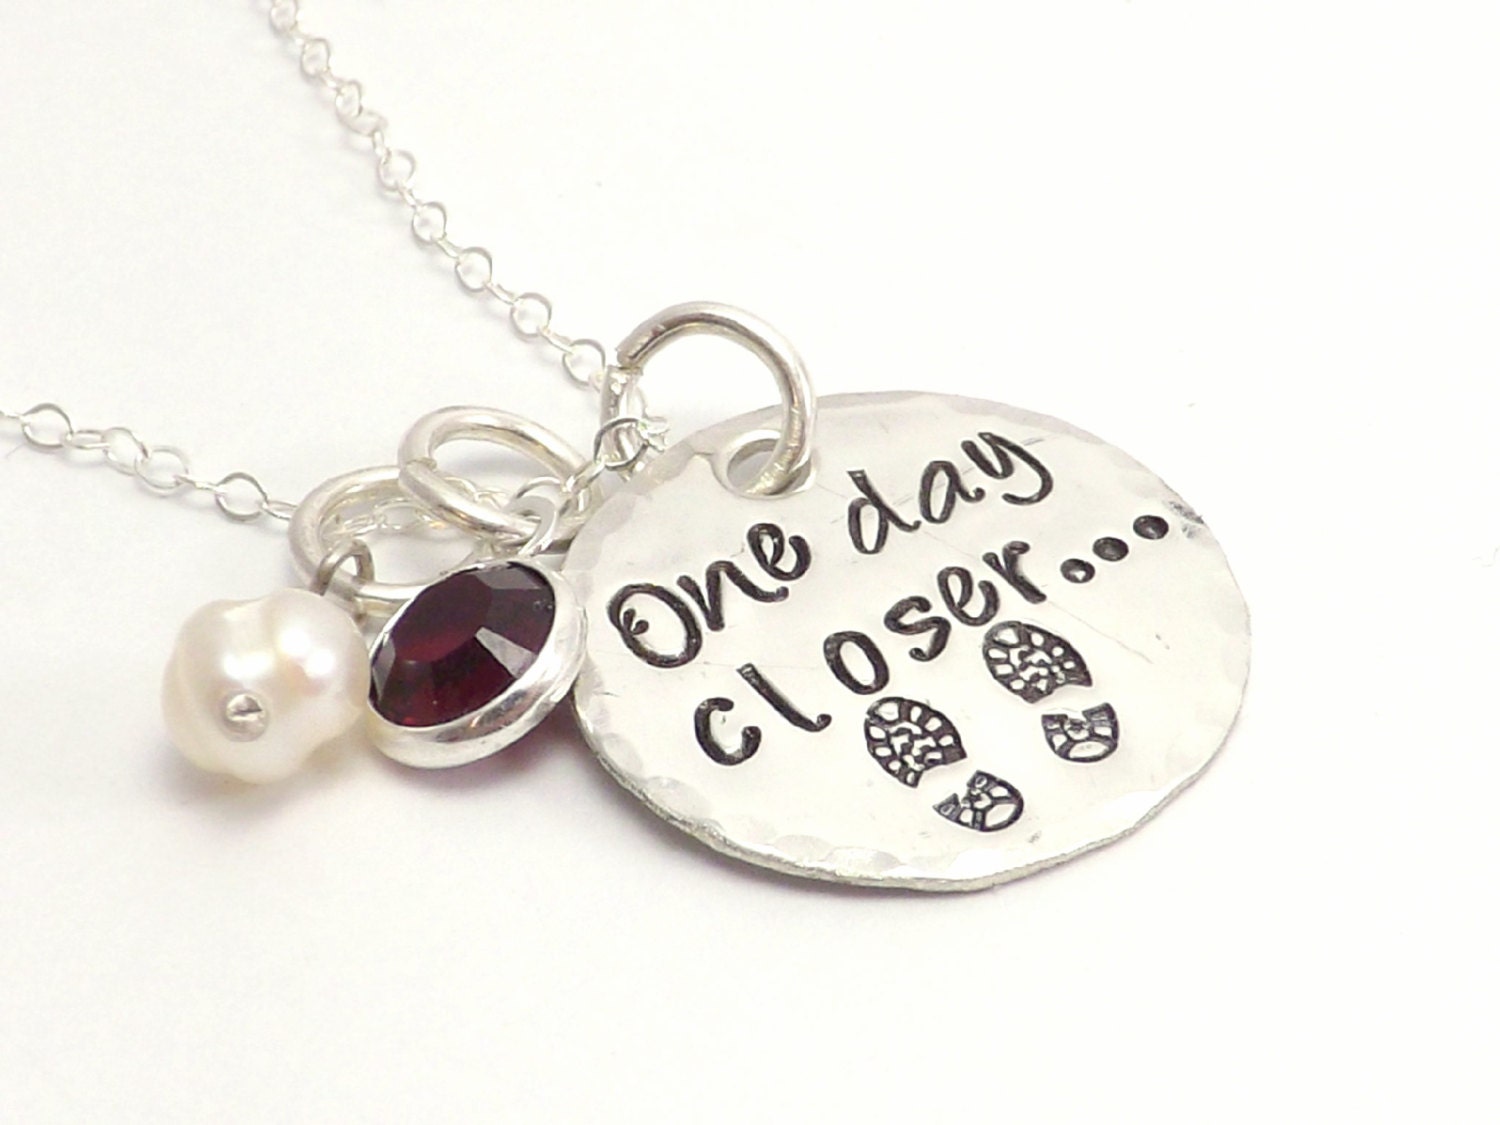 One Day Closer.. Hand Stamped Sterling Silver Necklace, Military Wife, Army Wife, Deployment Jewelry - MissAshleyJewelry